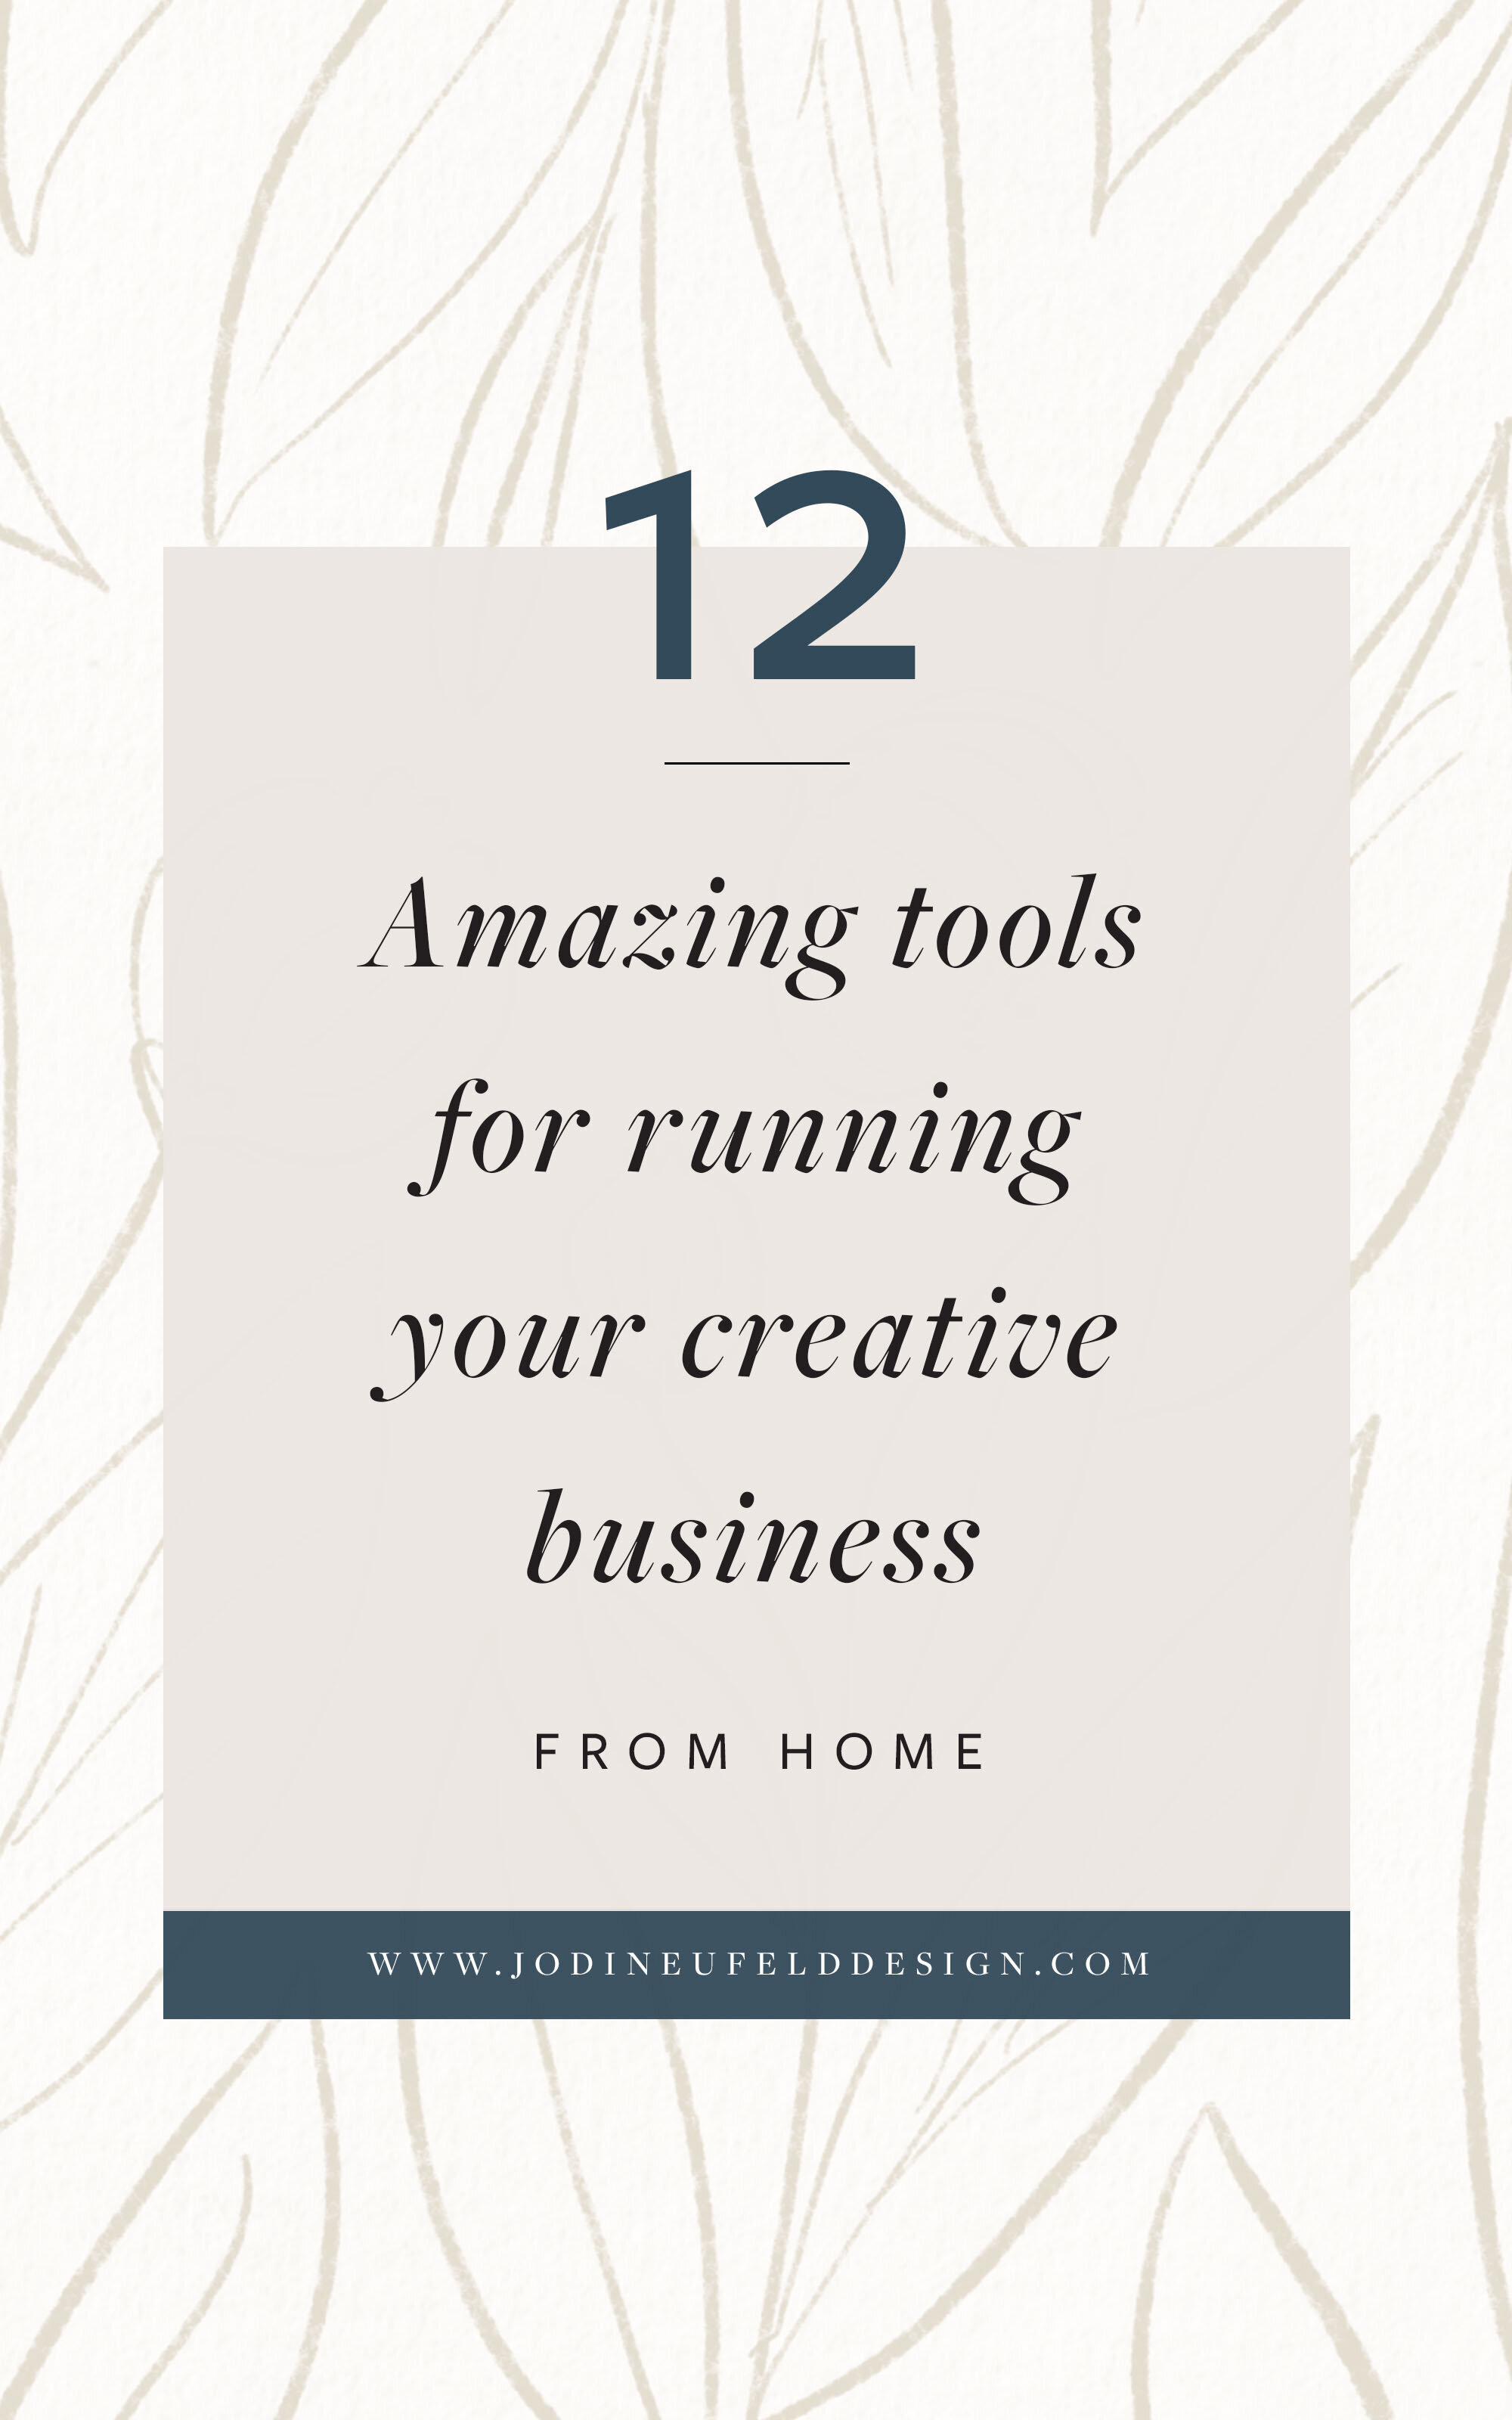 12 amazing tools for running your creative business from home by Jodi Neufeld Design